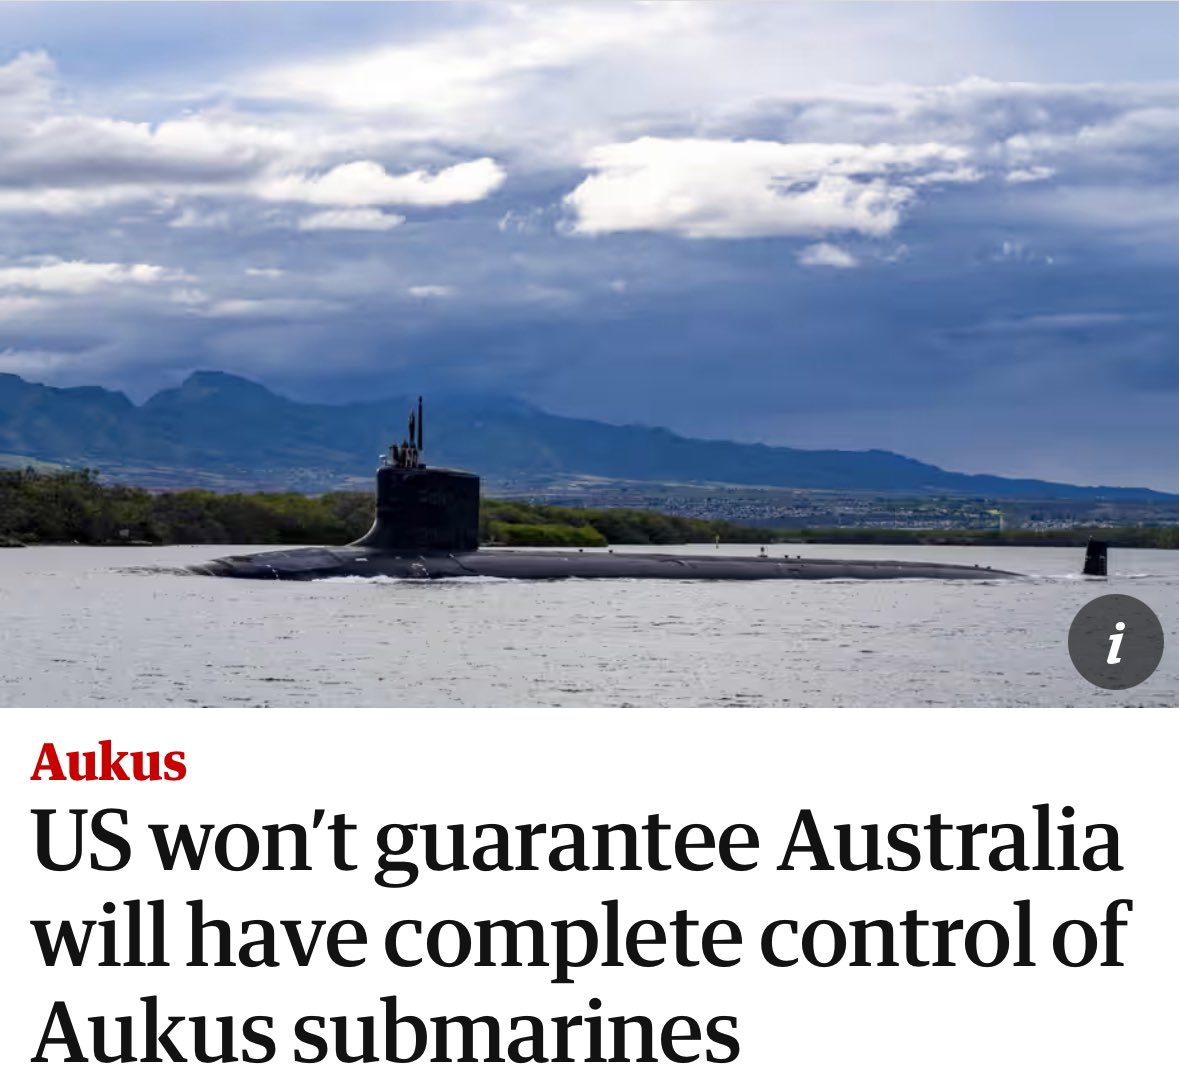 ❗AUKUS is incompatible with Australian sovereignty 

‘A US official has declined to explicitly guarantee Australia will have full control of the AUKUS nuclear-powered submarines, saying he won’t get “into some of the minutiae of various questions”’

theguardian.com/world/article/…